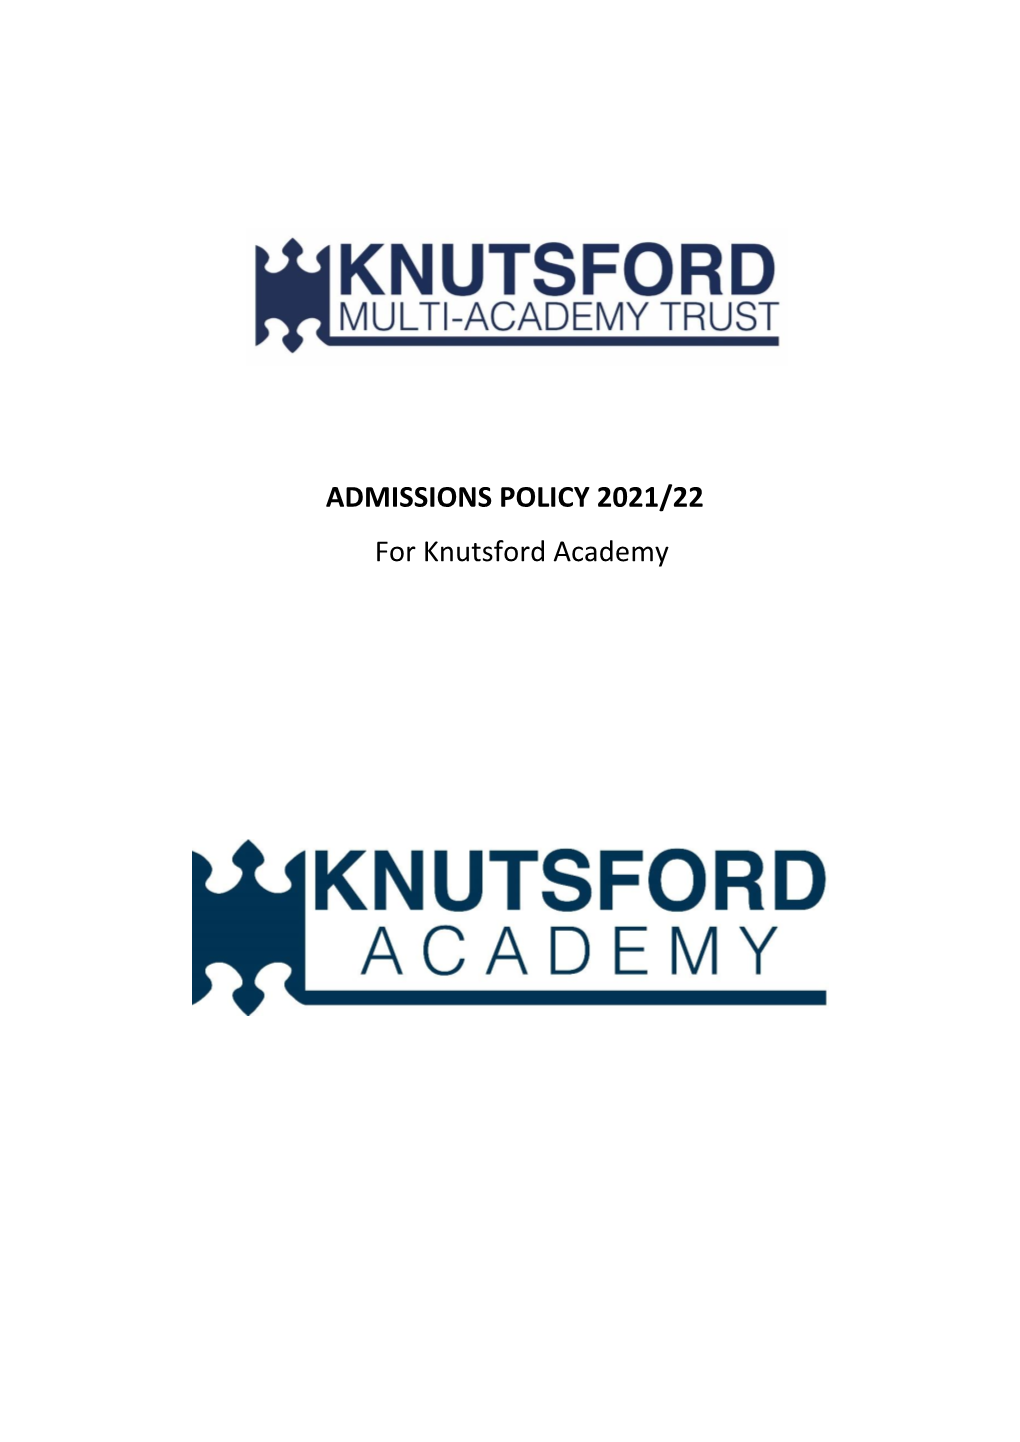 ADMISSIONS POLICY 2021/22 for Knutsford Academy